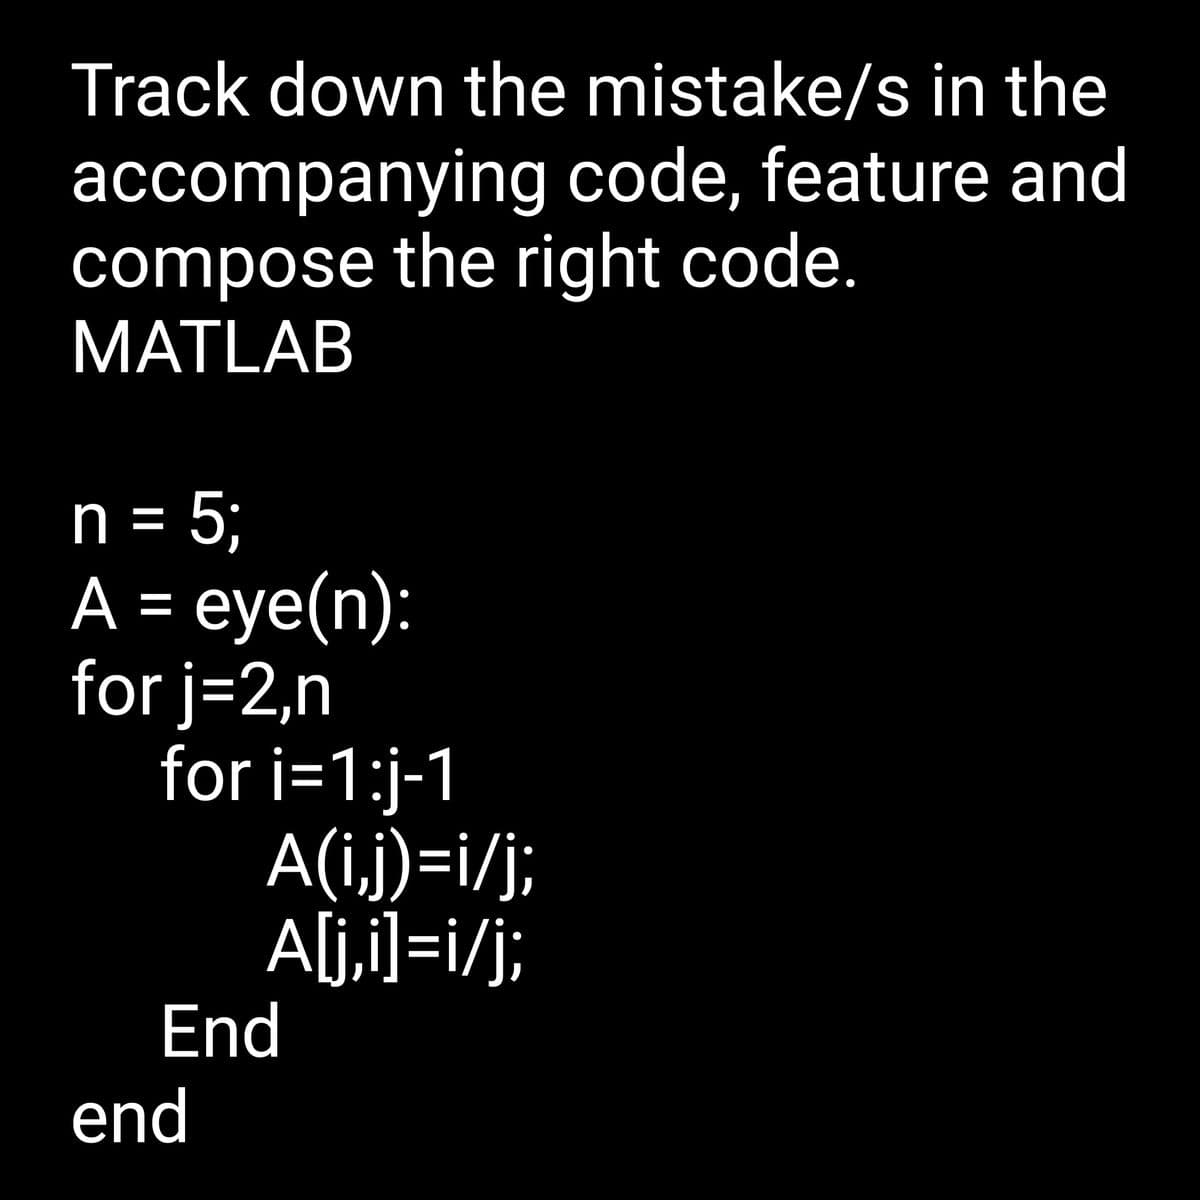 Track down the mistake/s in the
accompanying
code, feature and
compose the right code.
MATLAB
n = 5;
A = eye(n):
for j=2,n
for i=1:j-1
A(i,j)=i/j;
A[j,i]=i/j;
End
end